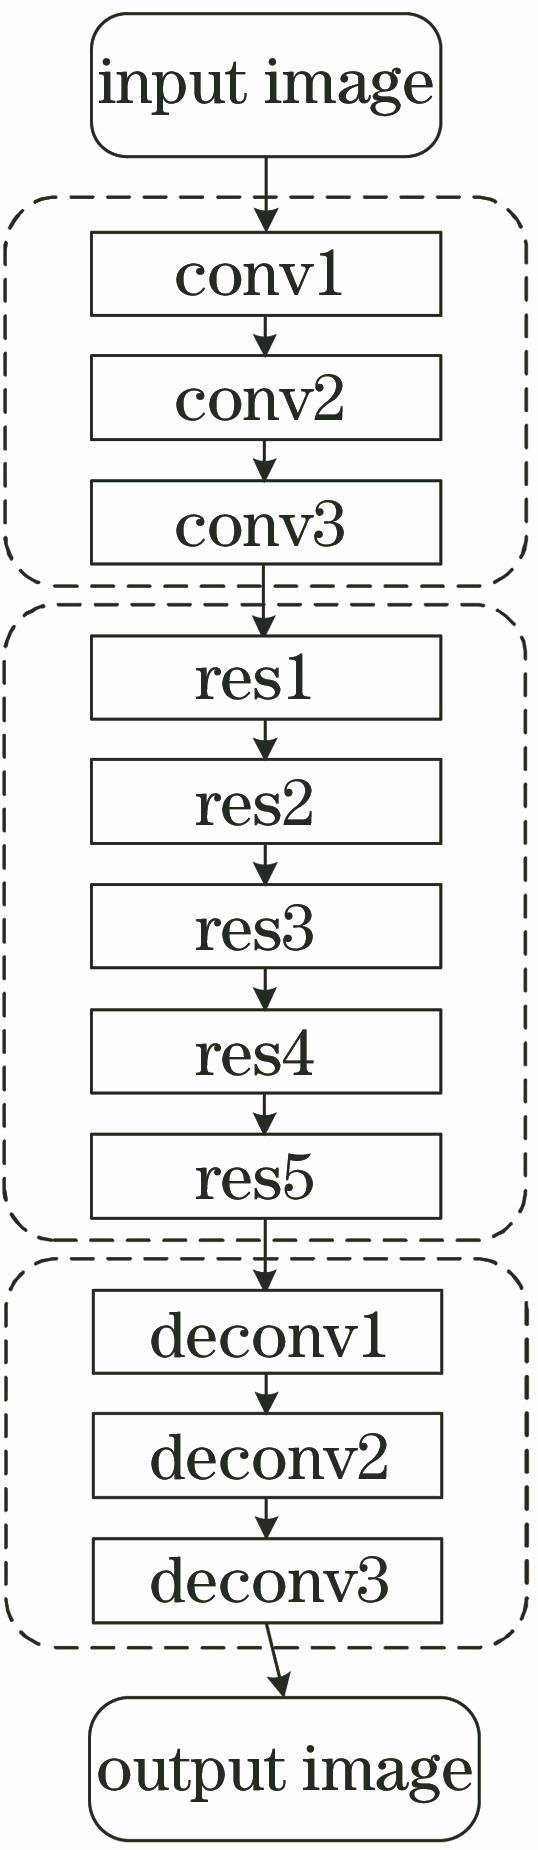 Image style transformation network structure